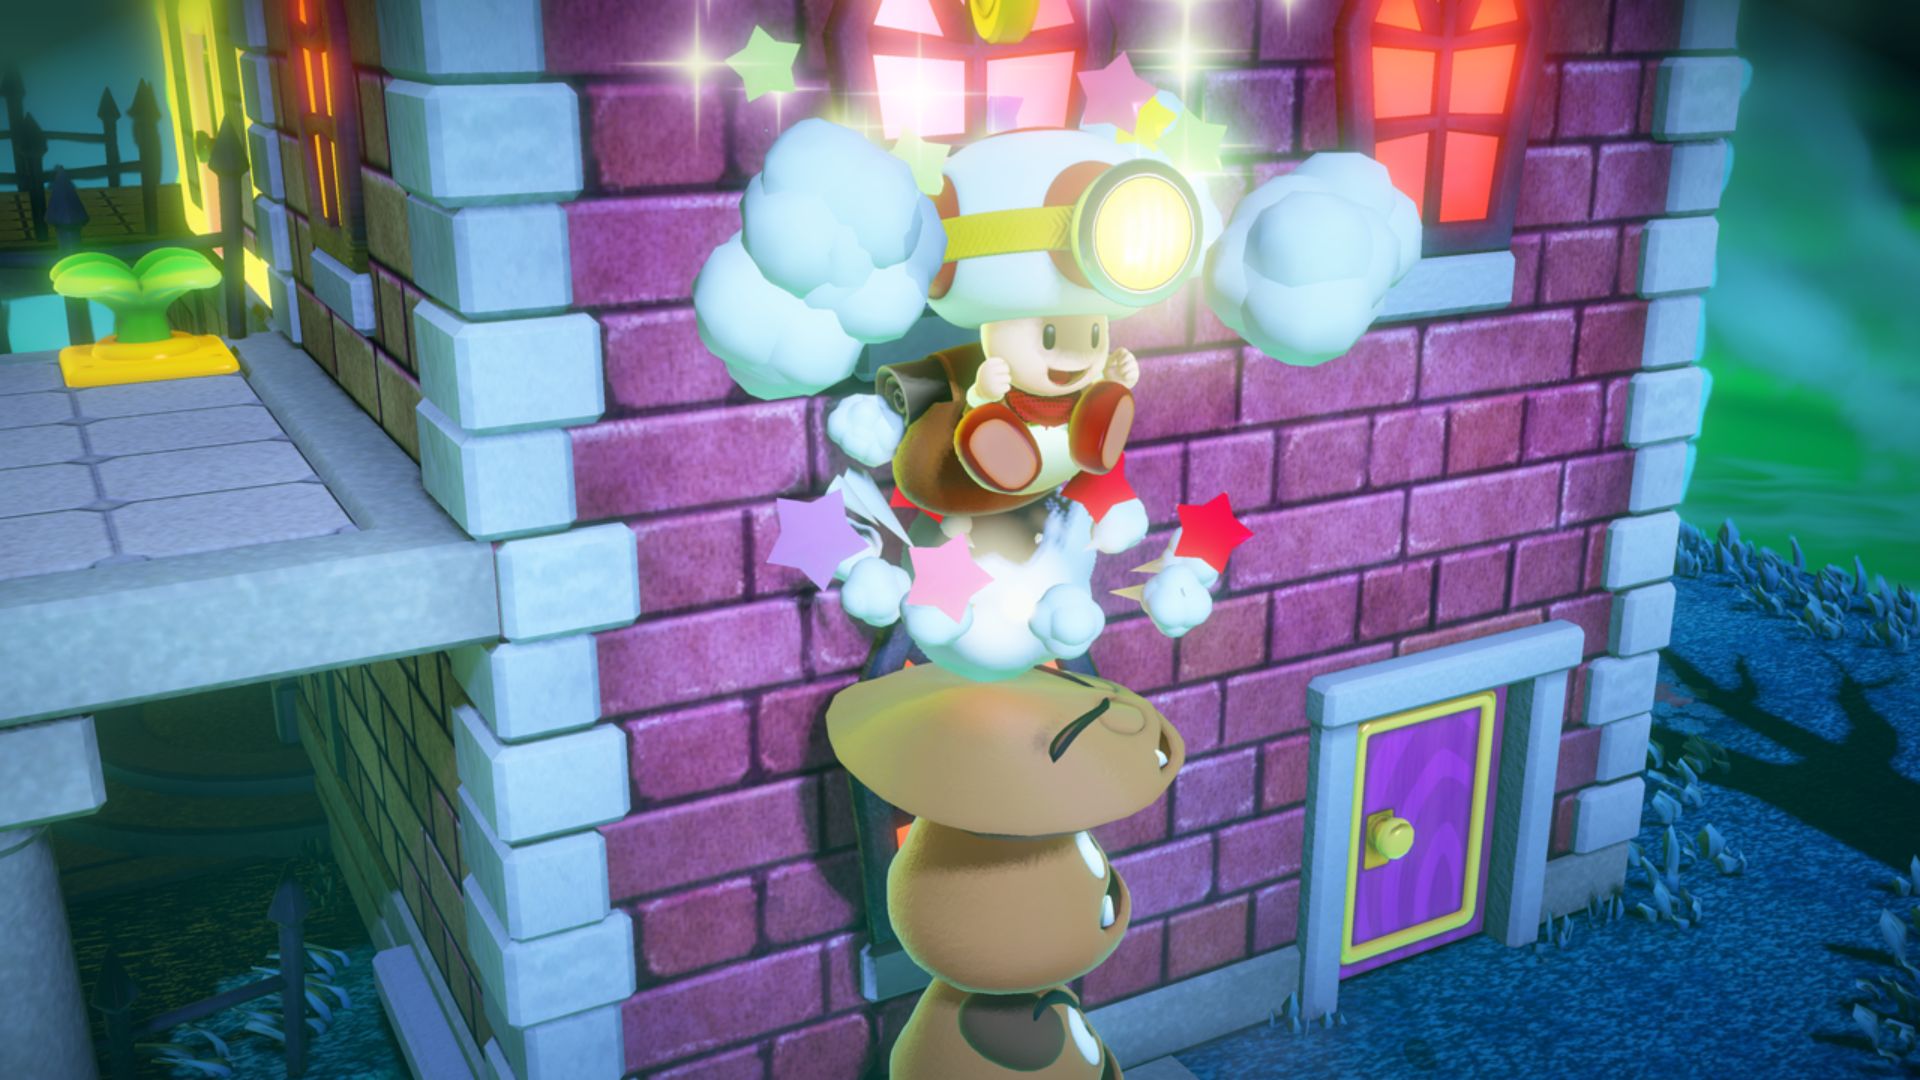 Captain Toad falls from a height and lands his butt on the head of a goomba stack, in the relaxing game Captain Toad: Treasure Tracker.